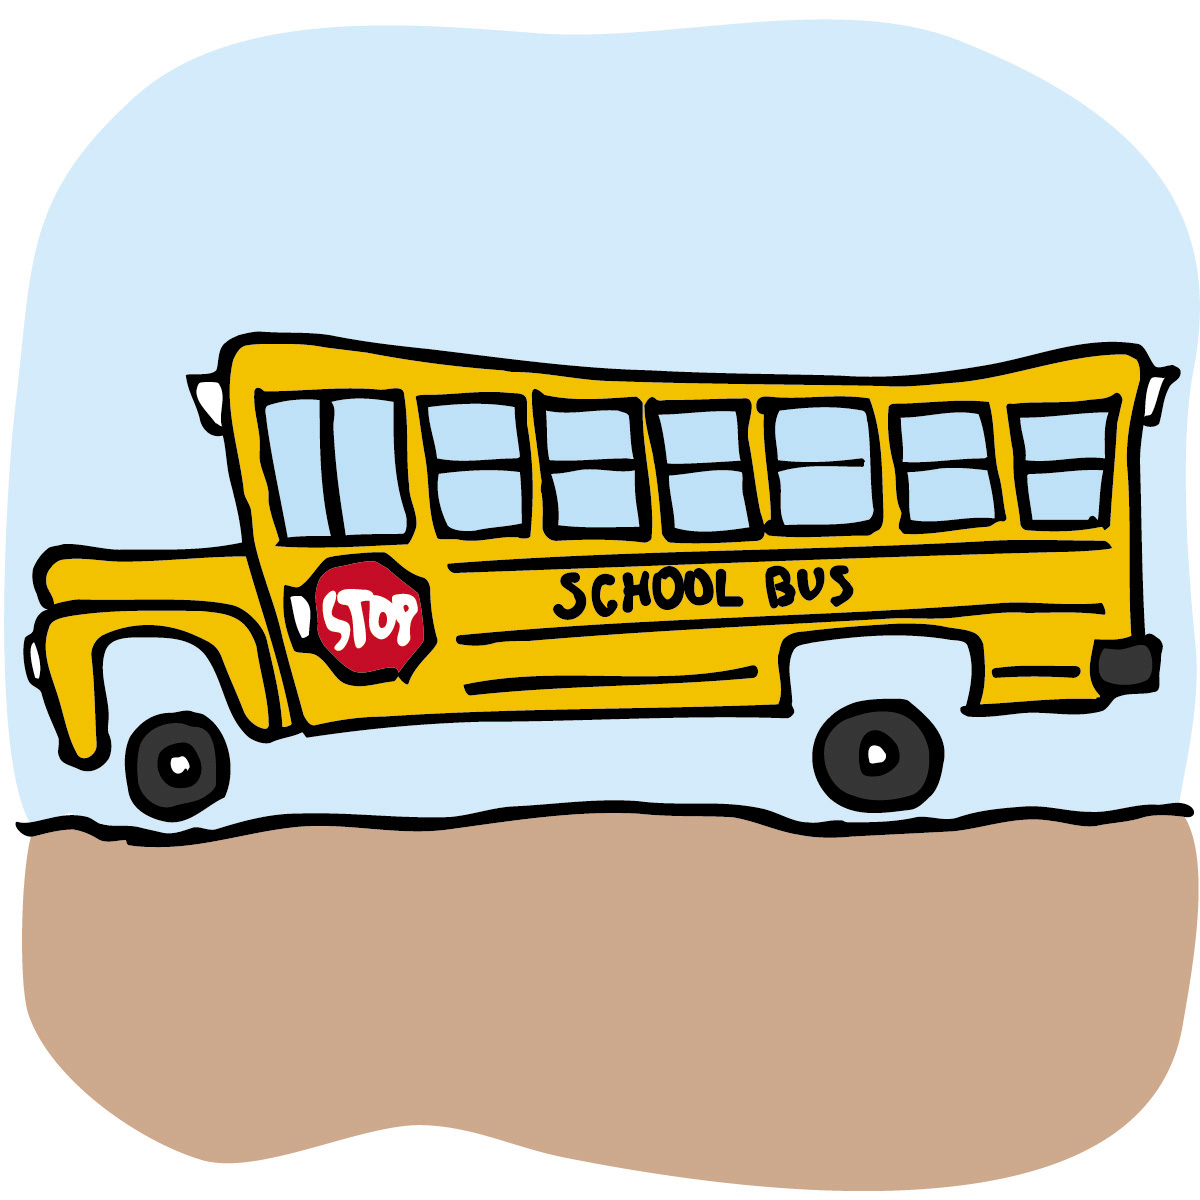 Daycare Bus Clip Art - Viewing | Clipart library - Free Clipart Images